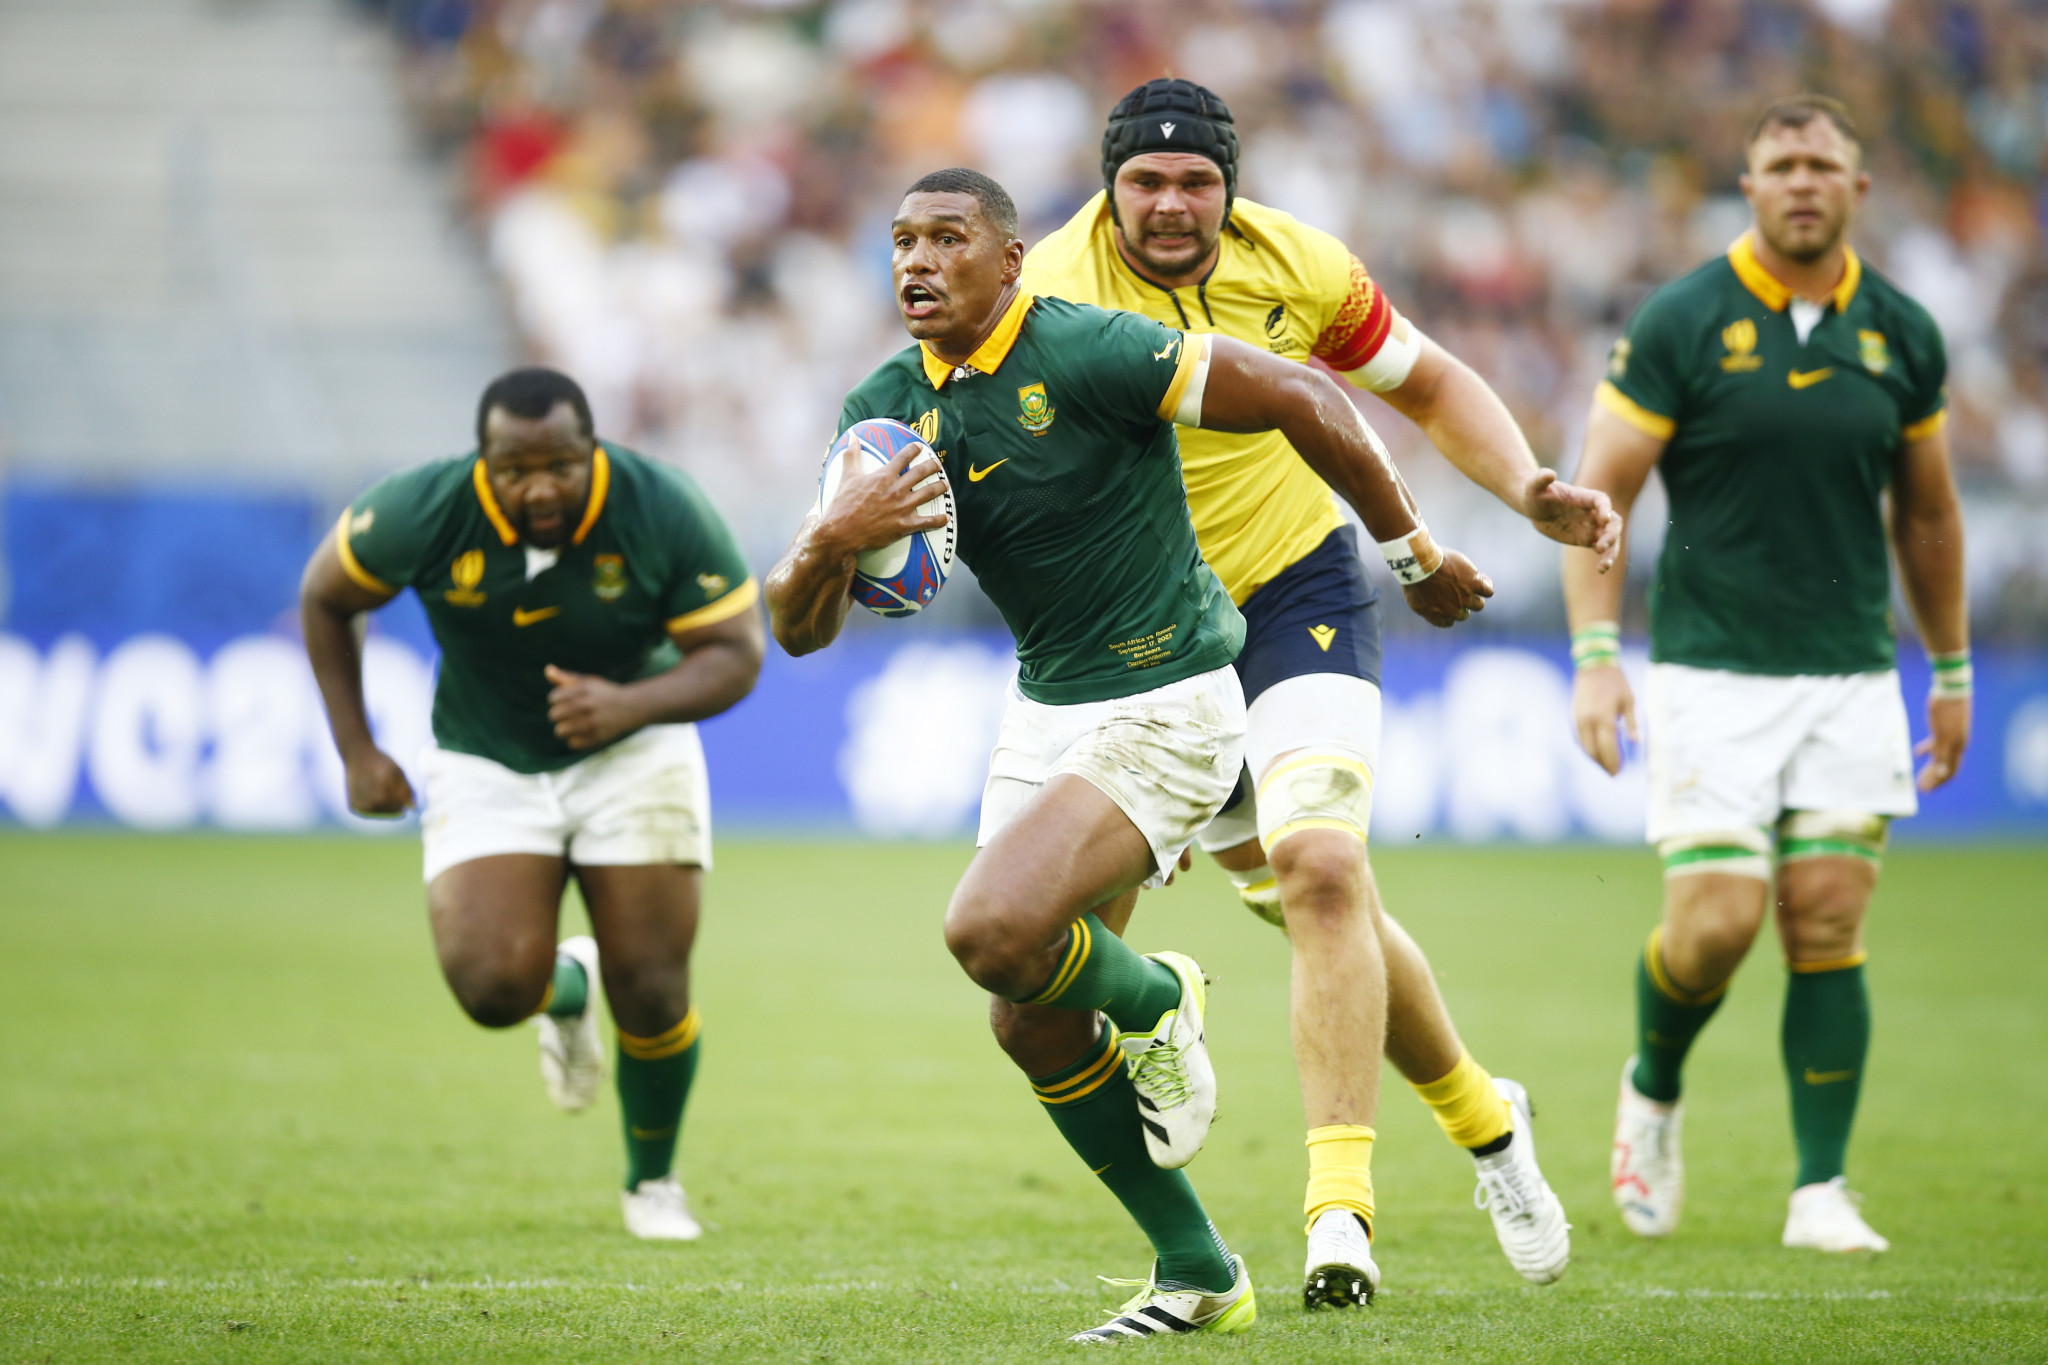 The first match of the day saw South Africa annihilate Romania 76-0 ©Getty Images